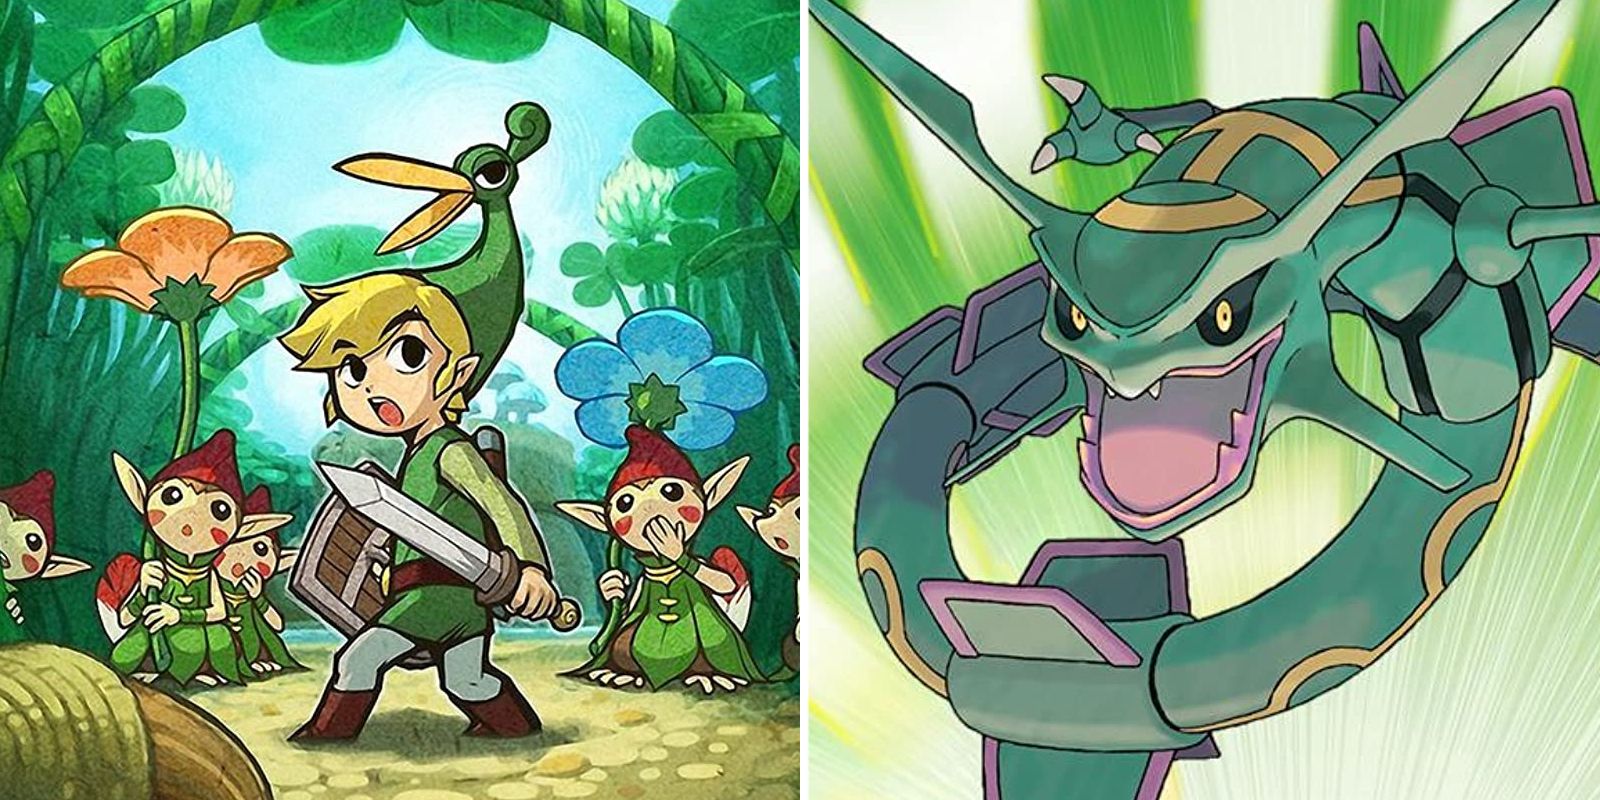 Link, Ezlo, and the Minish on the cover of The Legend of Zelda The Minish Cap and Rayquaza on the cover of Pokemon Emerald